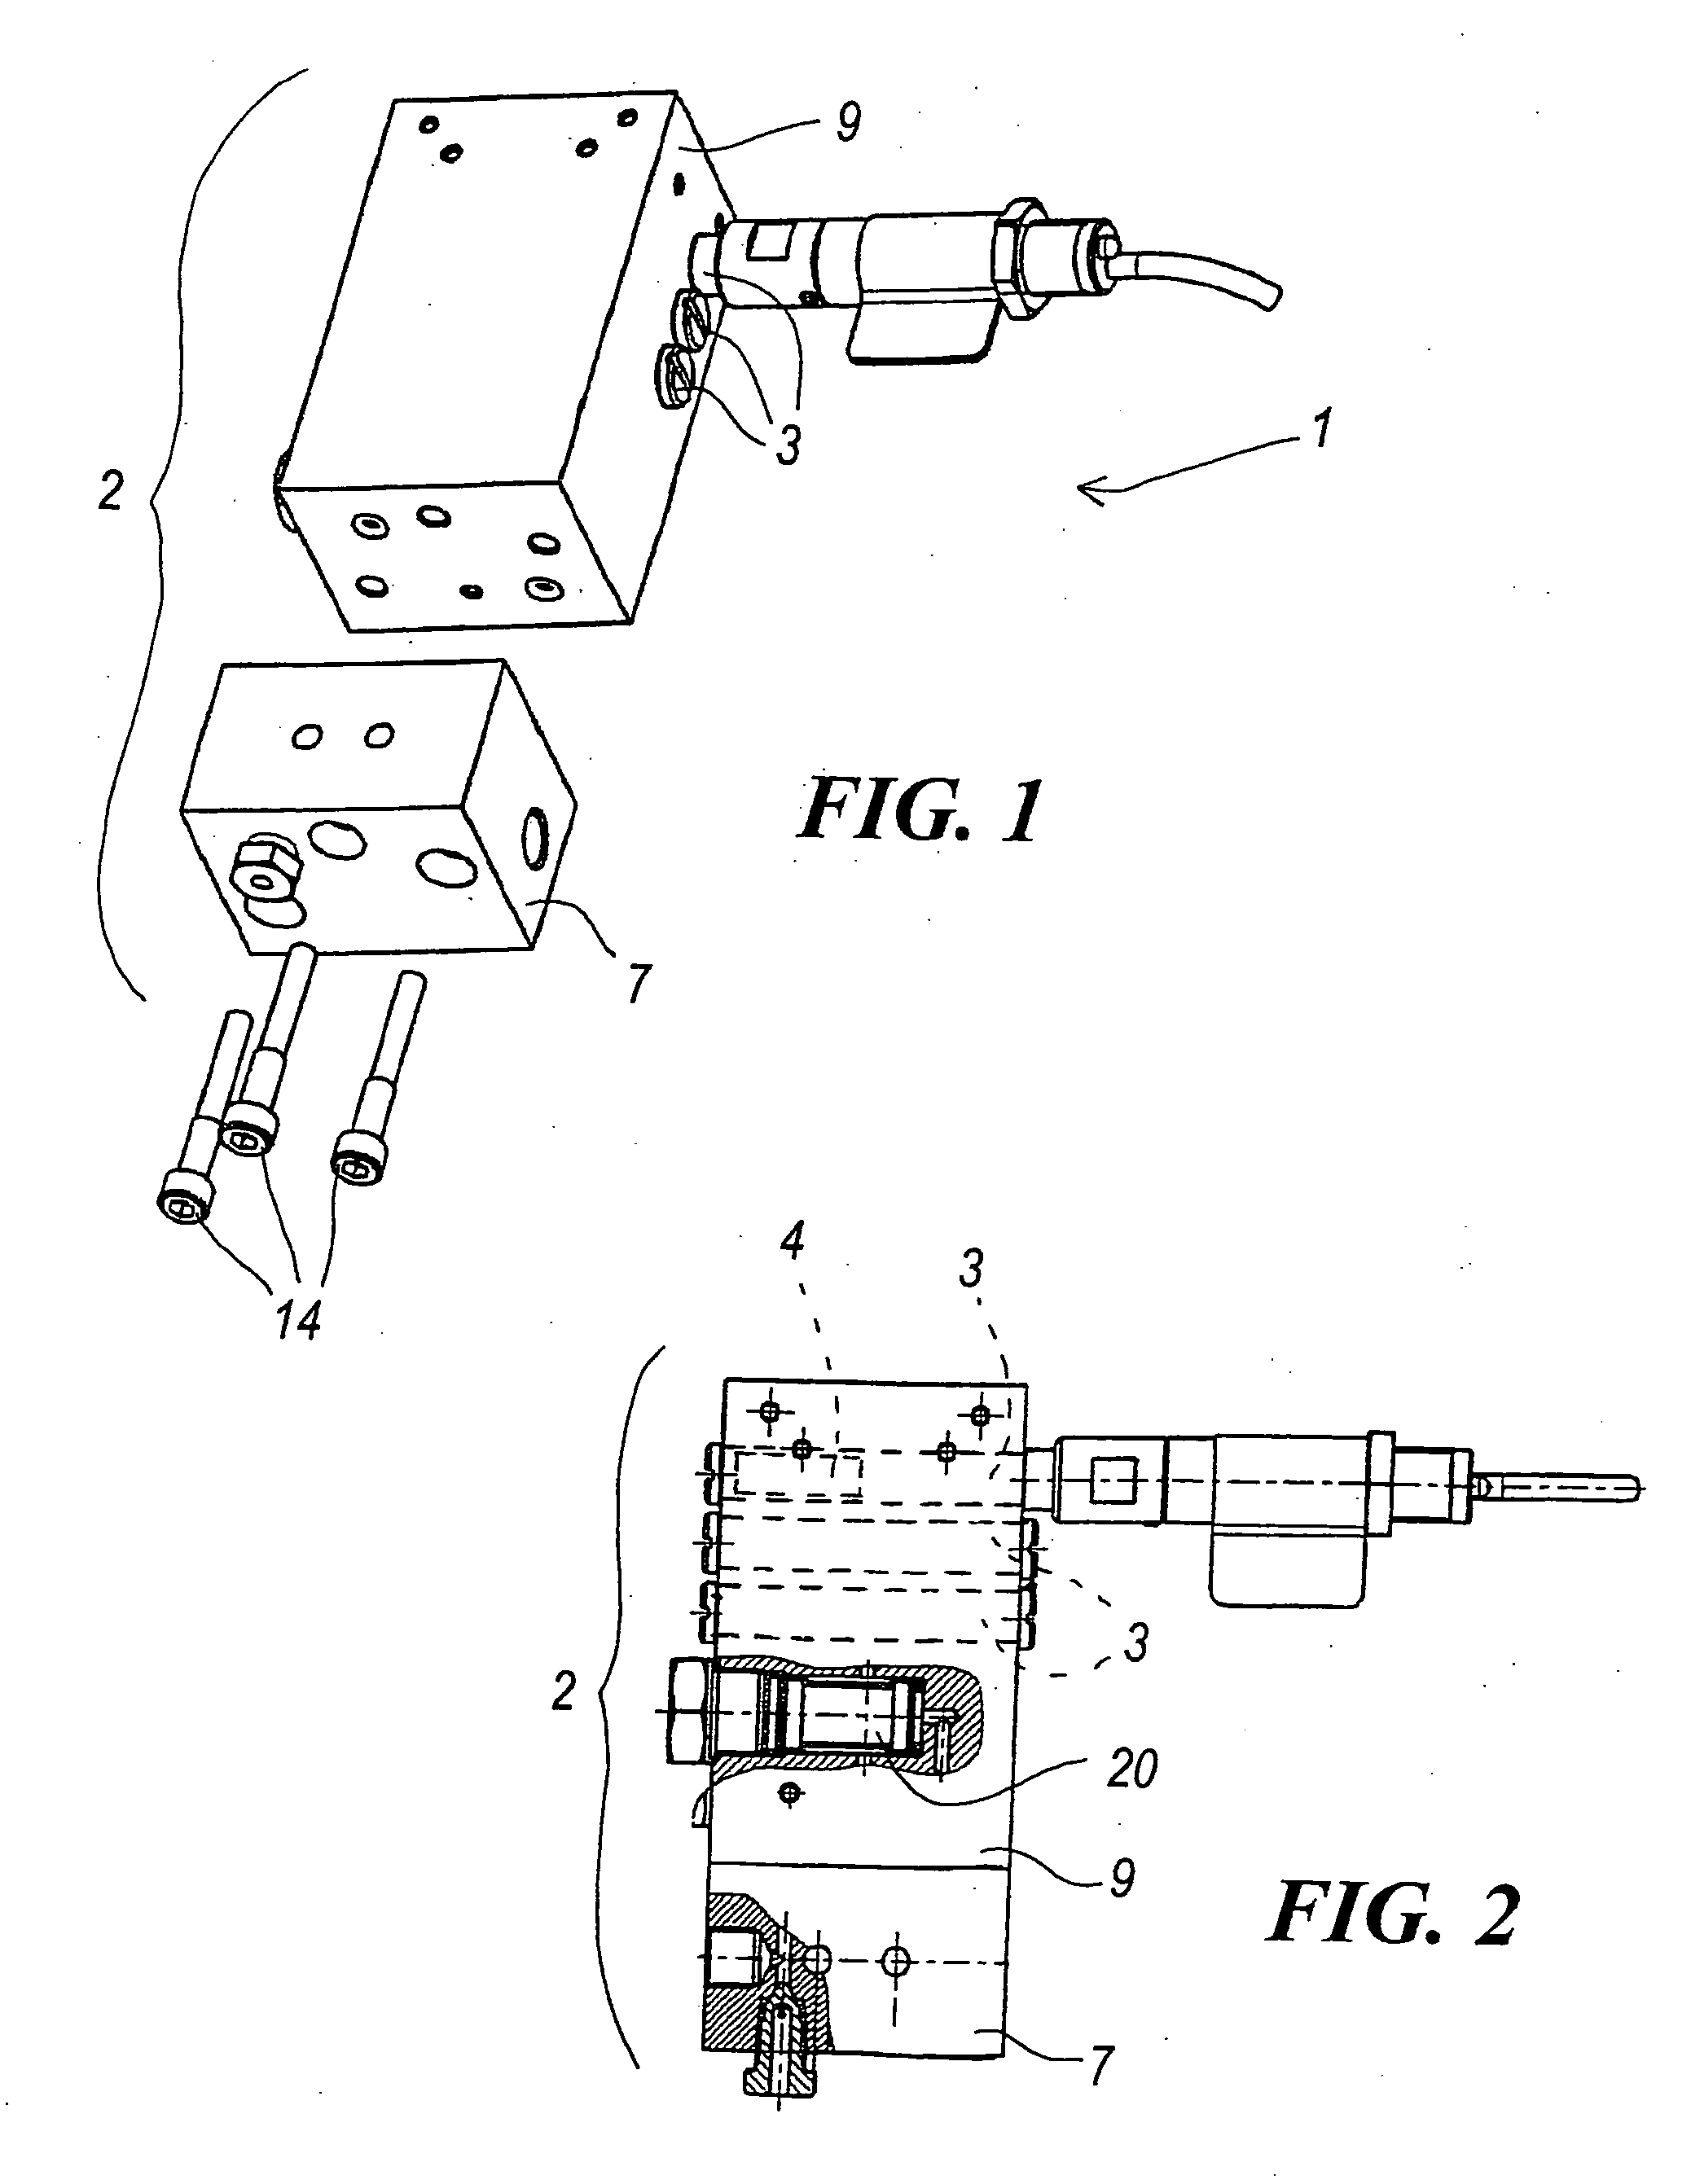 Control device for a fluid flow rate